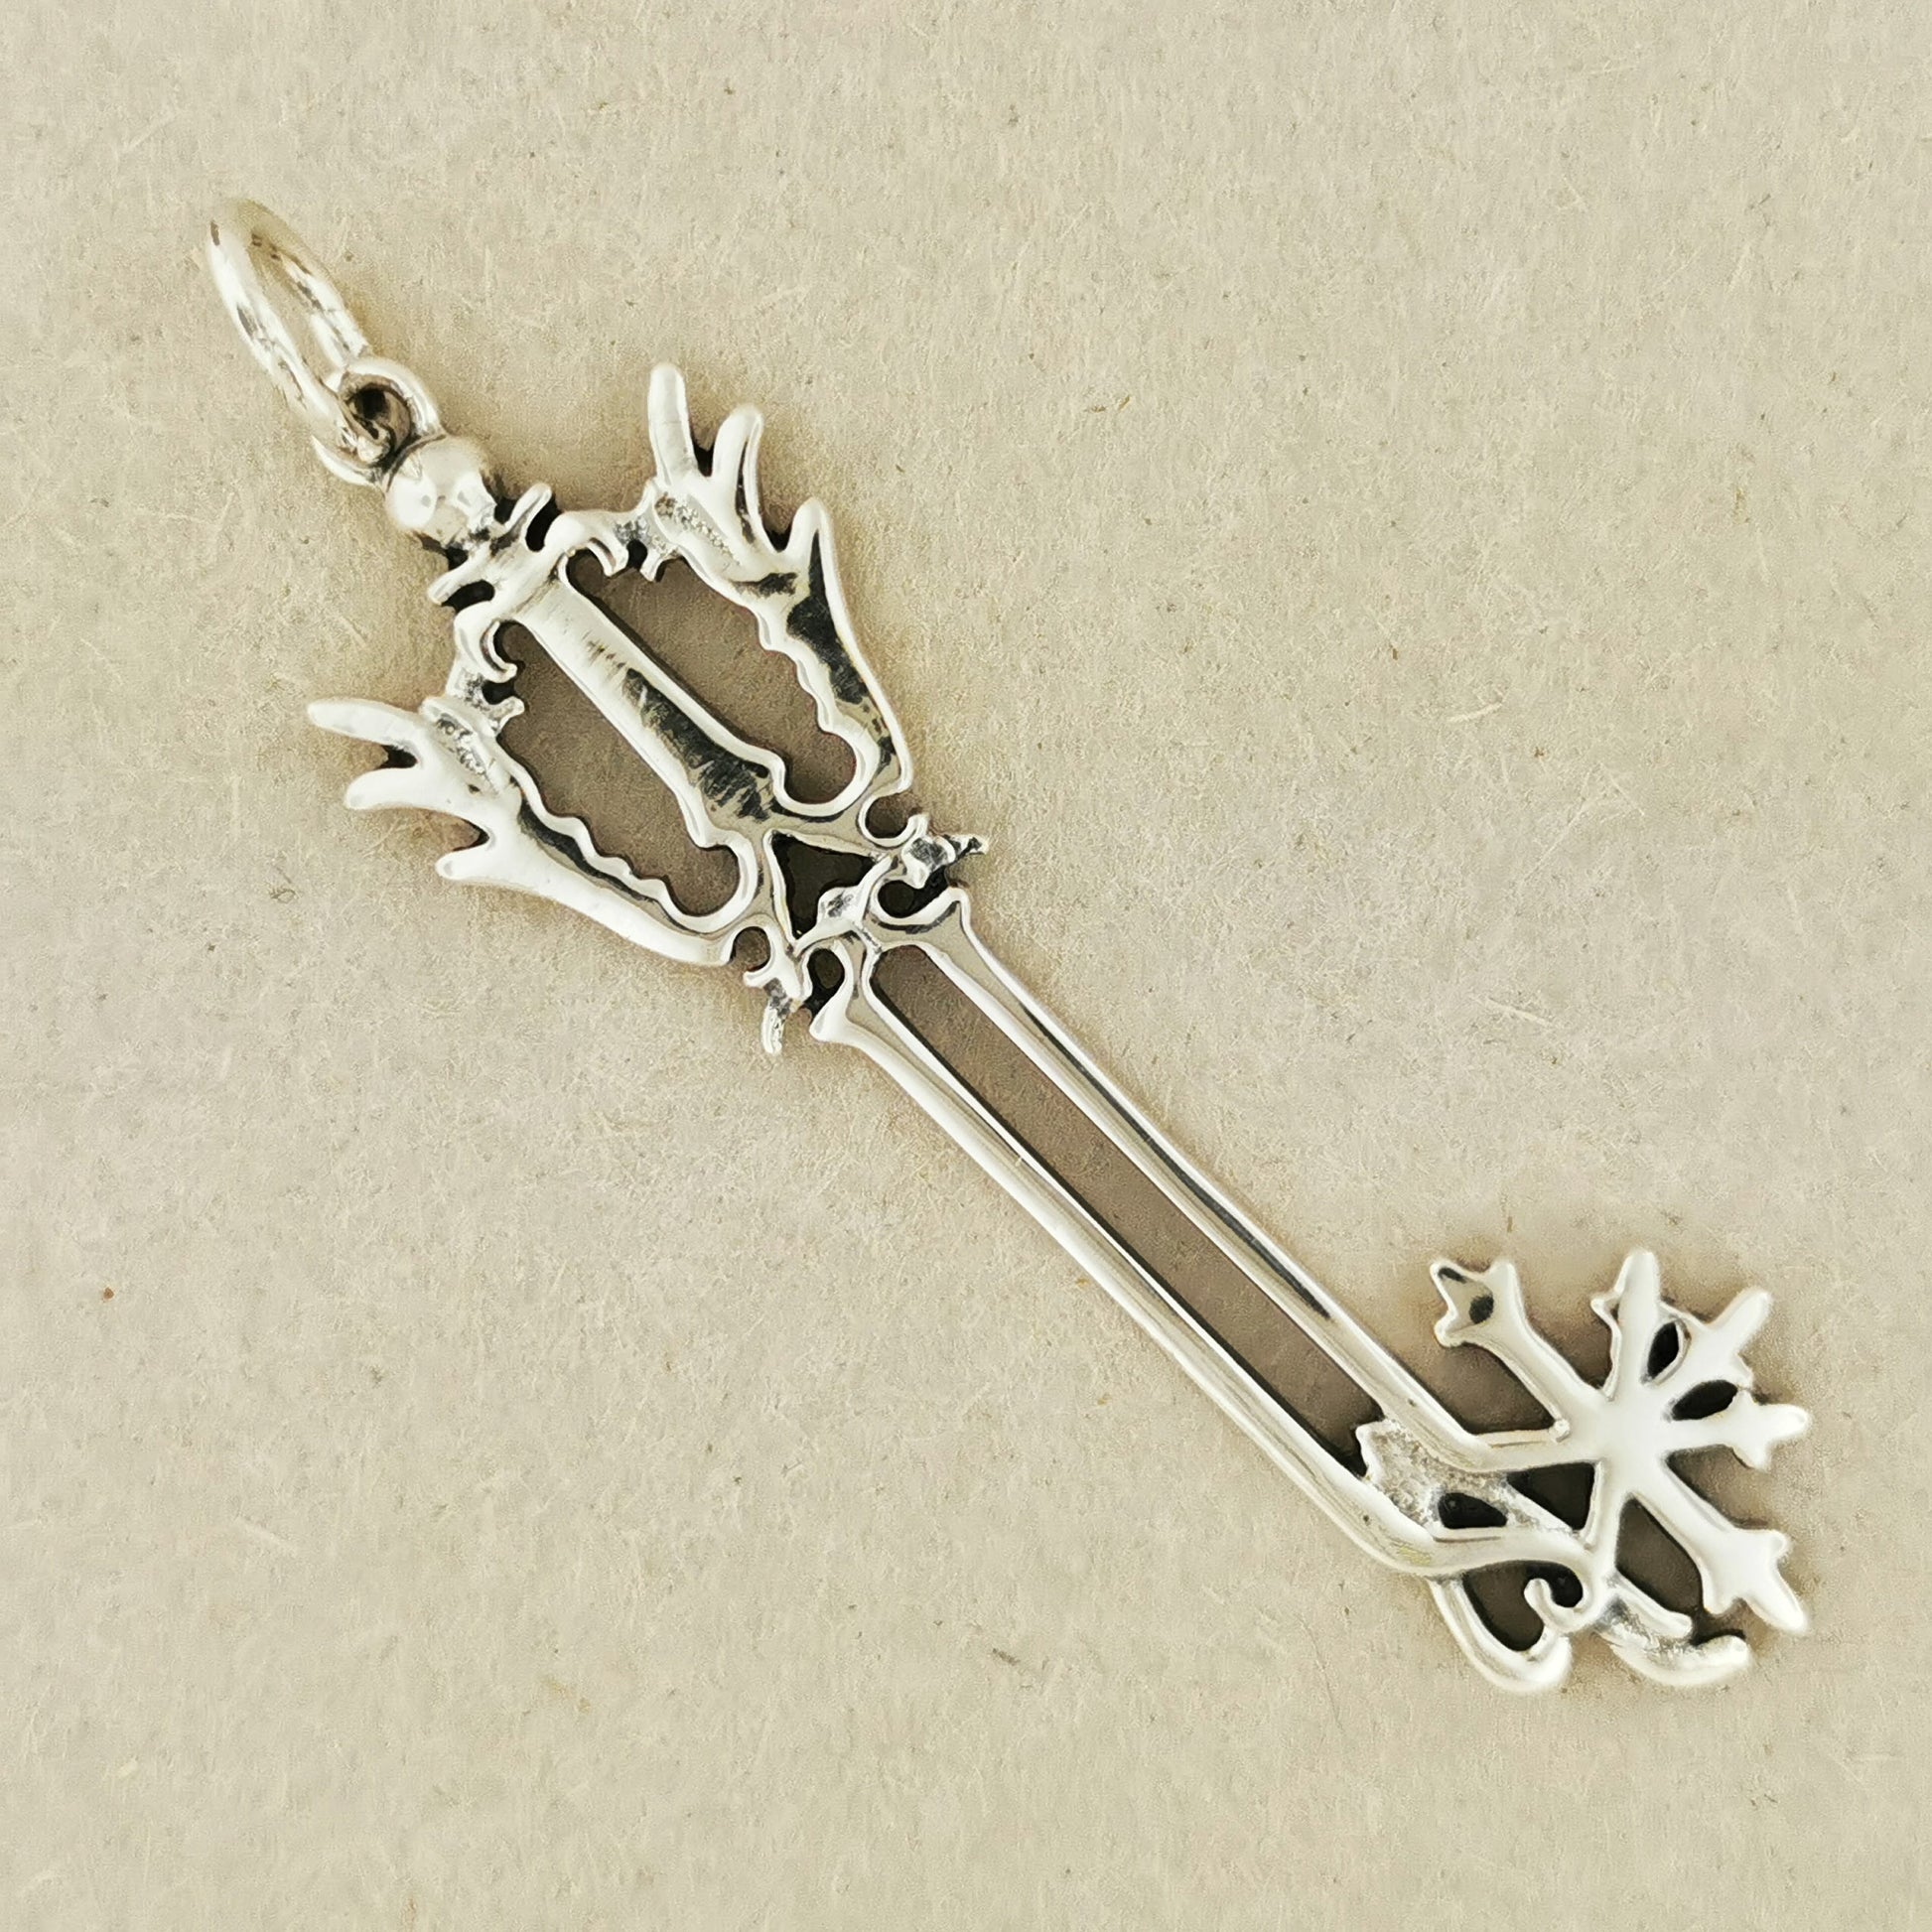 Kingdom Hearts Oathkeeper Keyblade Pendant in Sterling Silver or Antique Bronze, video game pendant, silver key pendant, gamer feek jewelry, gamer geek jewellery, KH Keyblade Pendant, Silver Key Pendant, Silver Keyblade Pendant, One Winged Angel Pendant, Oathkeeper Keyblade Pendant, Silver Keyblade Pendant, Silver Cosplay Pendant, Bronze Cosplay Pendant, Antique Bronze Key, Anitque Bronze Keyblade Pendant